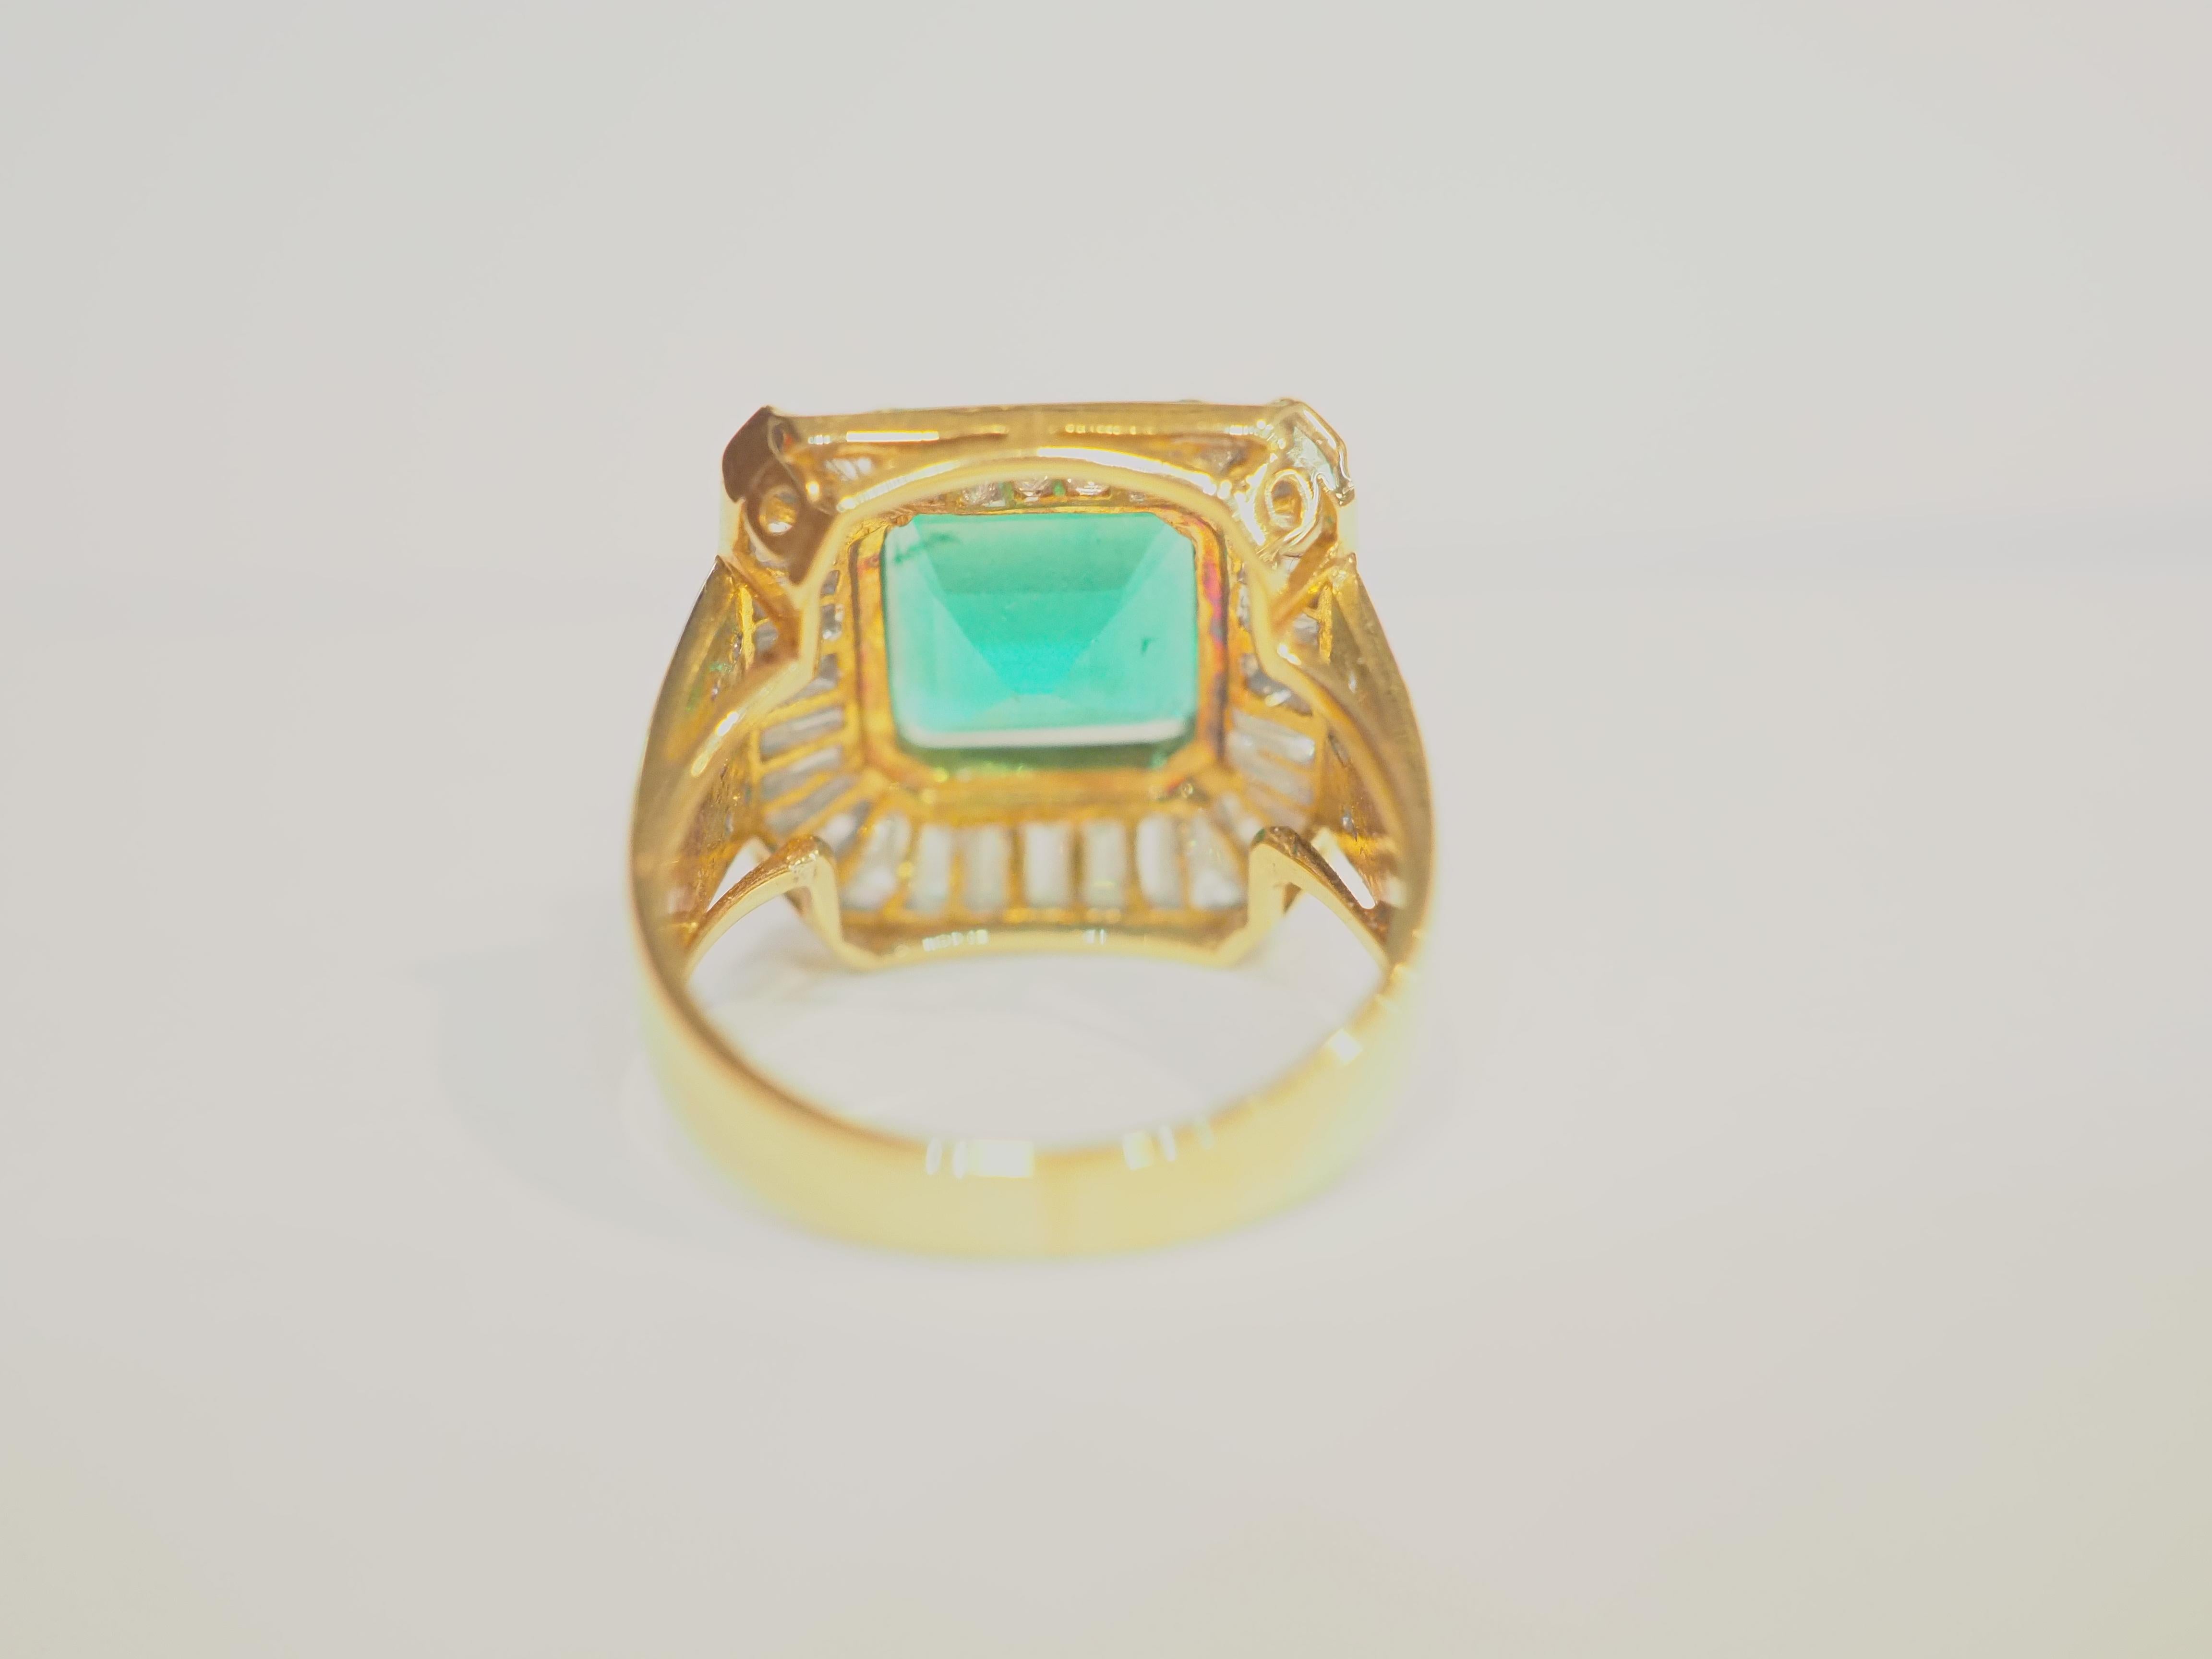 Emerald Cut 18K Gold 5.10ct Colombian Emerald & 1.54ct Diamond Cocktail Ring For Sale